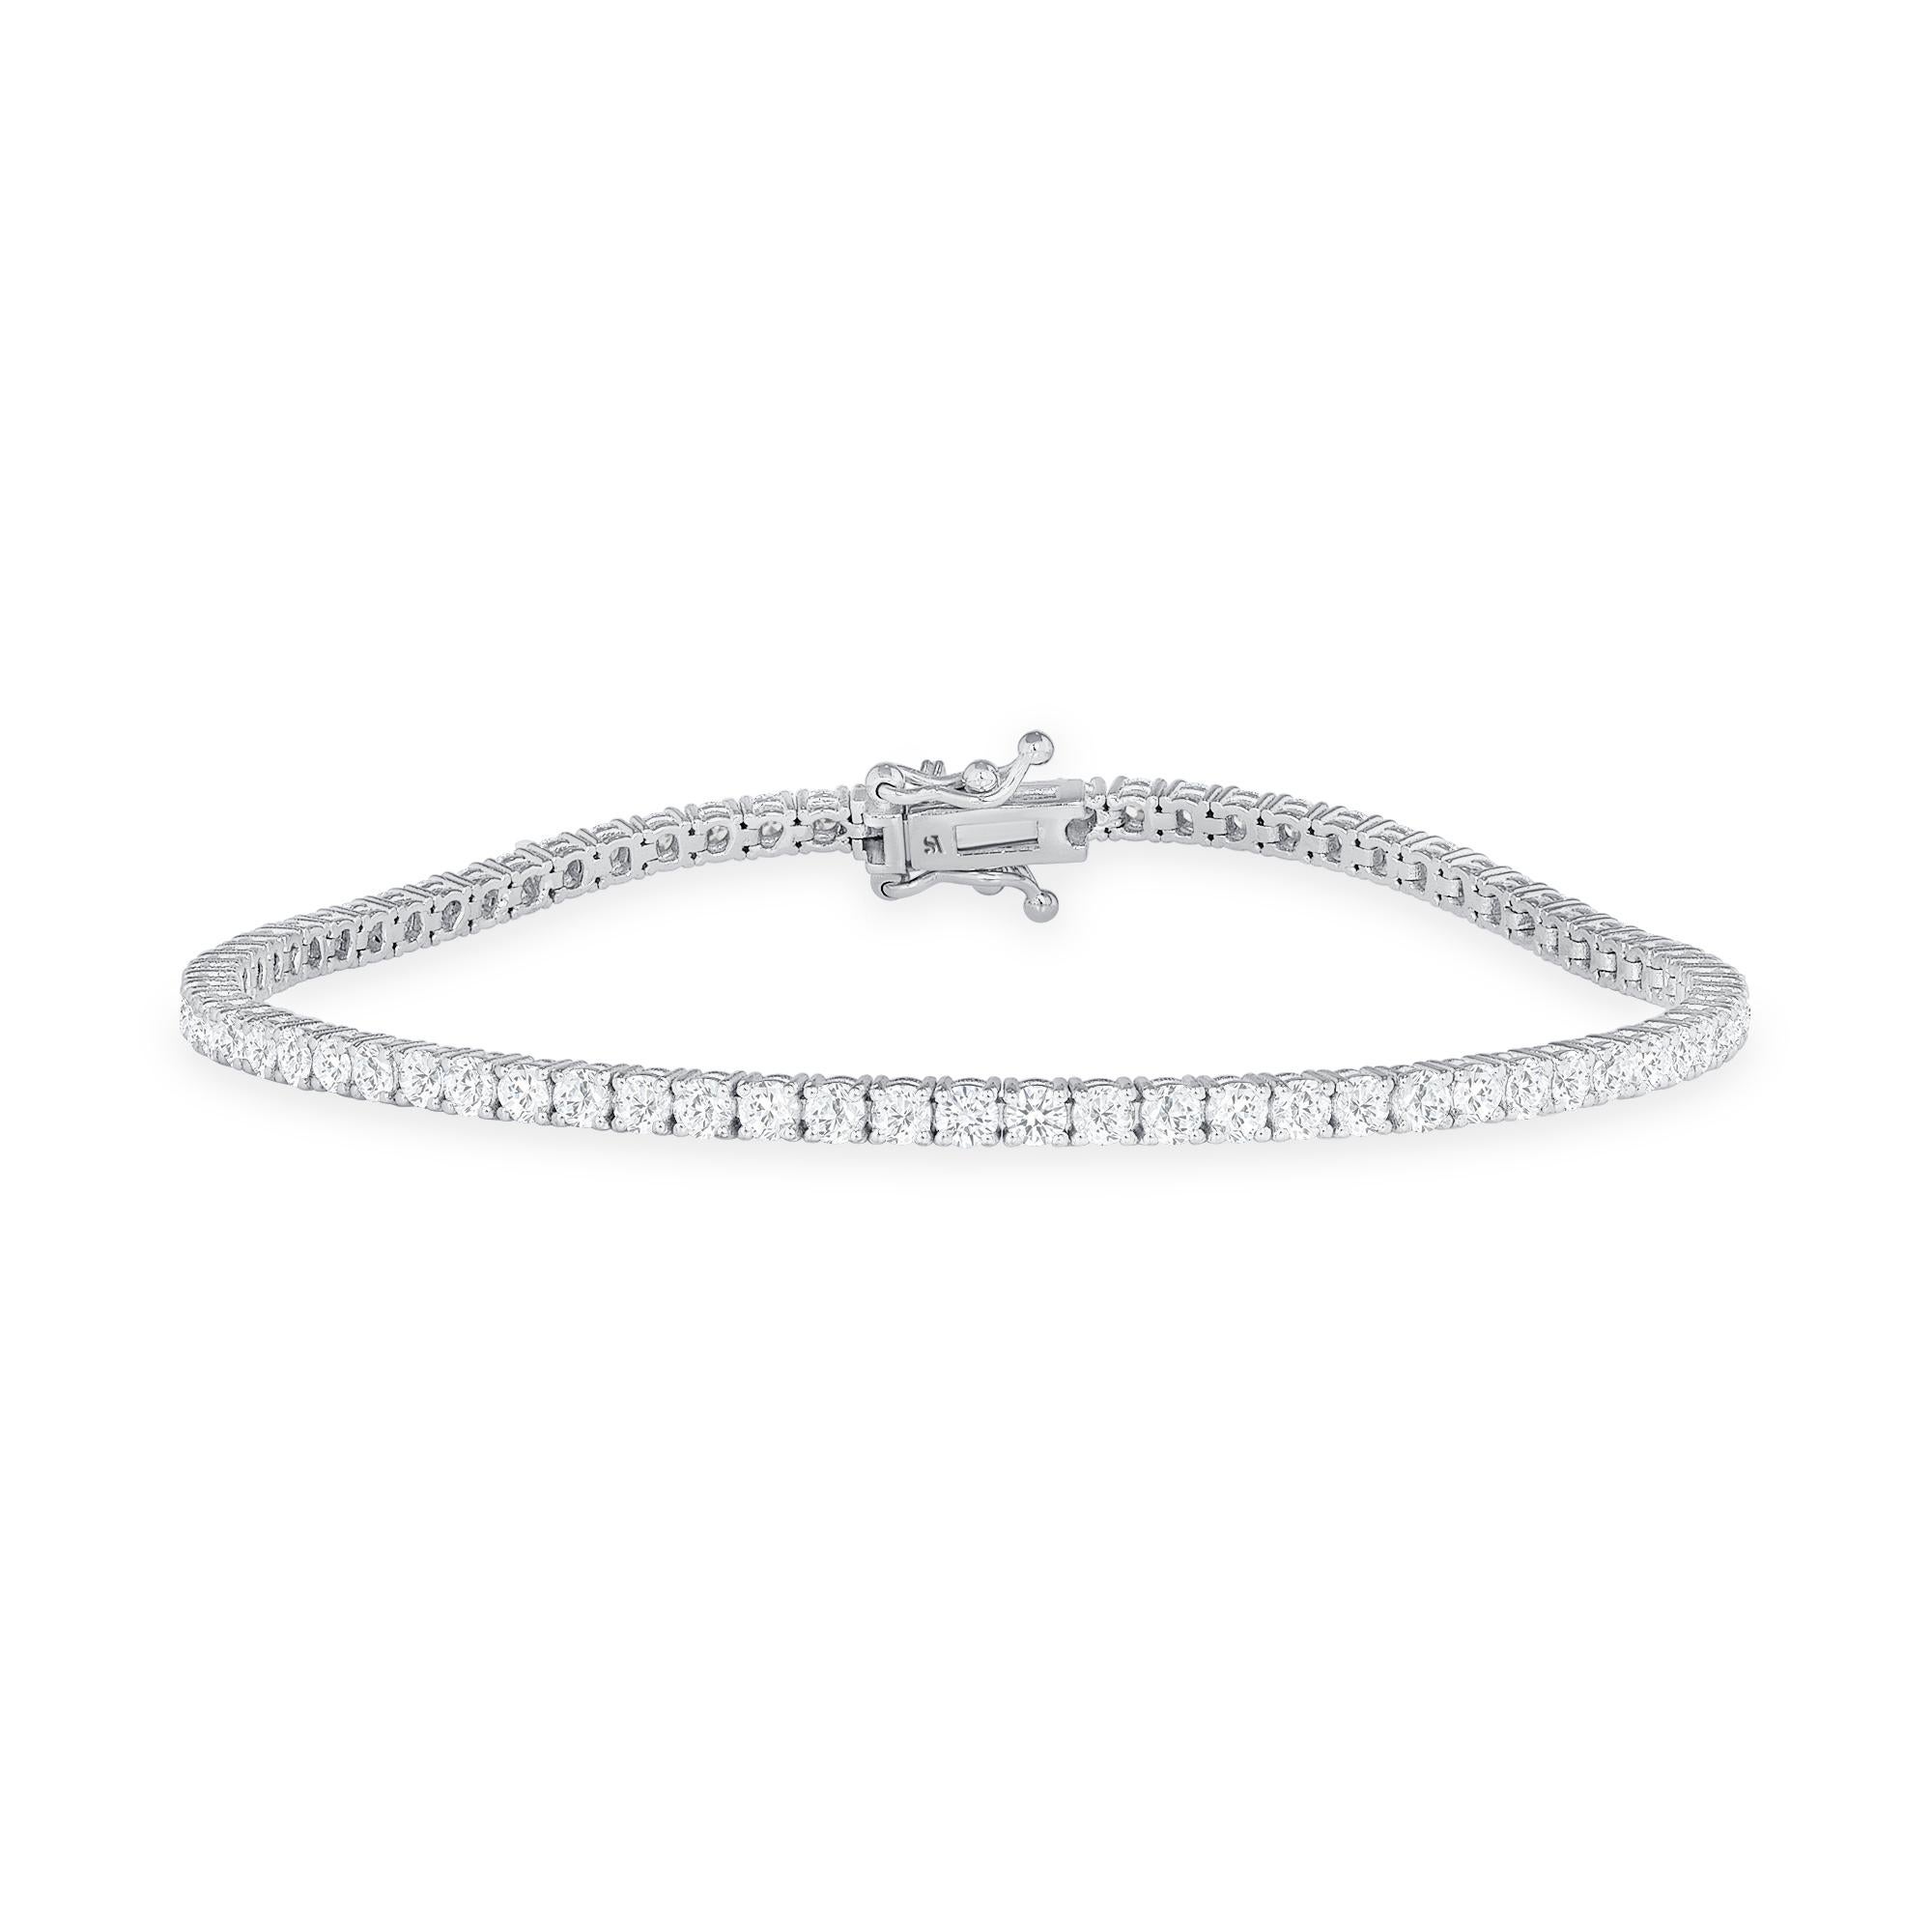 14K White Gold Natural Diamond Tennis Bracelet

Wrap your wrist in this stunning tennis bracelets incomparable brilliance from round diamonds. Set in 14K solid gold, this beautiful natural diamond bracelet features a secure double clasp so you can